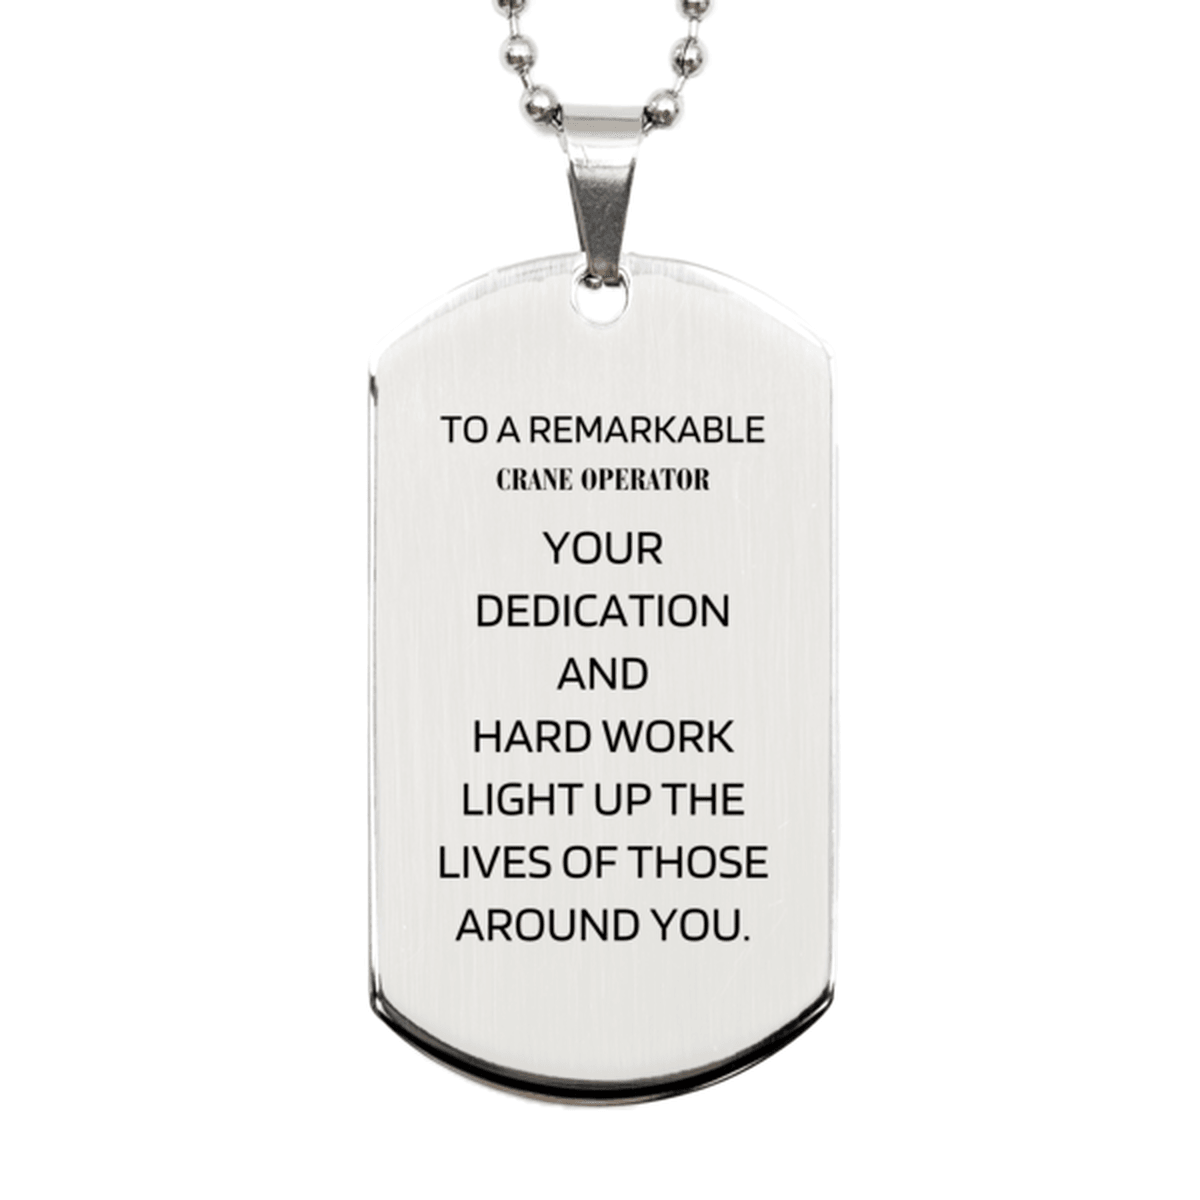 Remarkable Crane Operator Gifts, Your dedication and hard work, Inspirational Birthday Christmas Unique Silver Dog Tag For Crane Operator, Coworkers, Men, Women, Friends - Mallard Moon Gift Shop